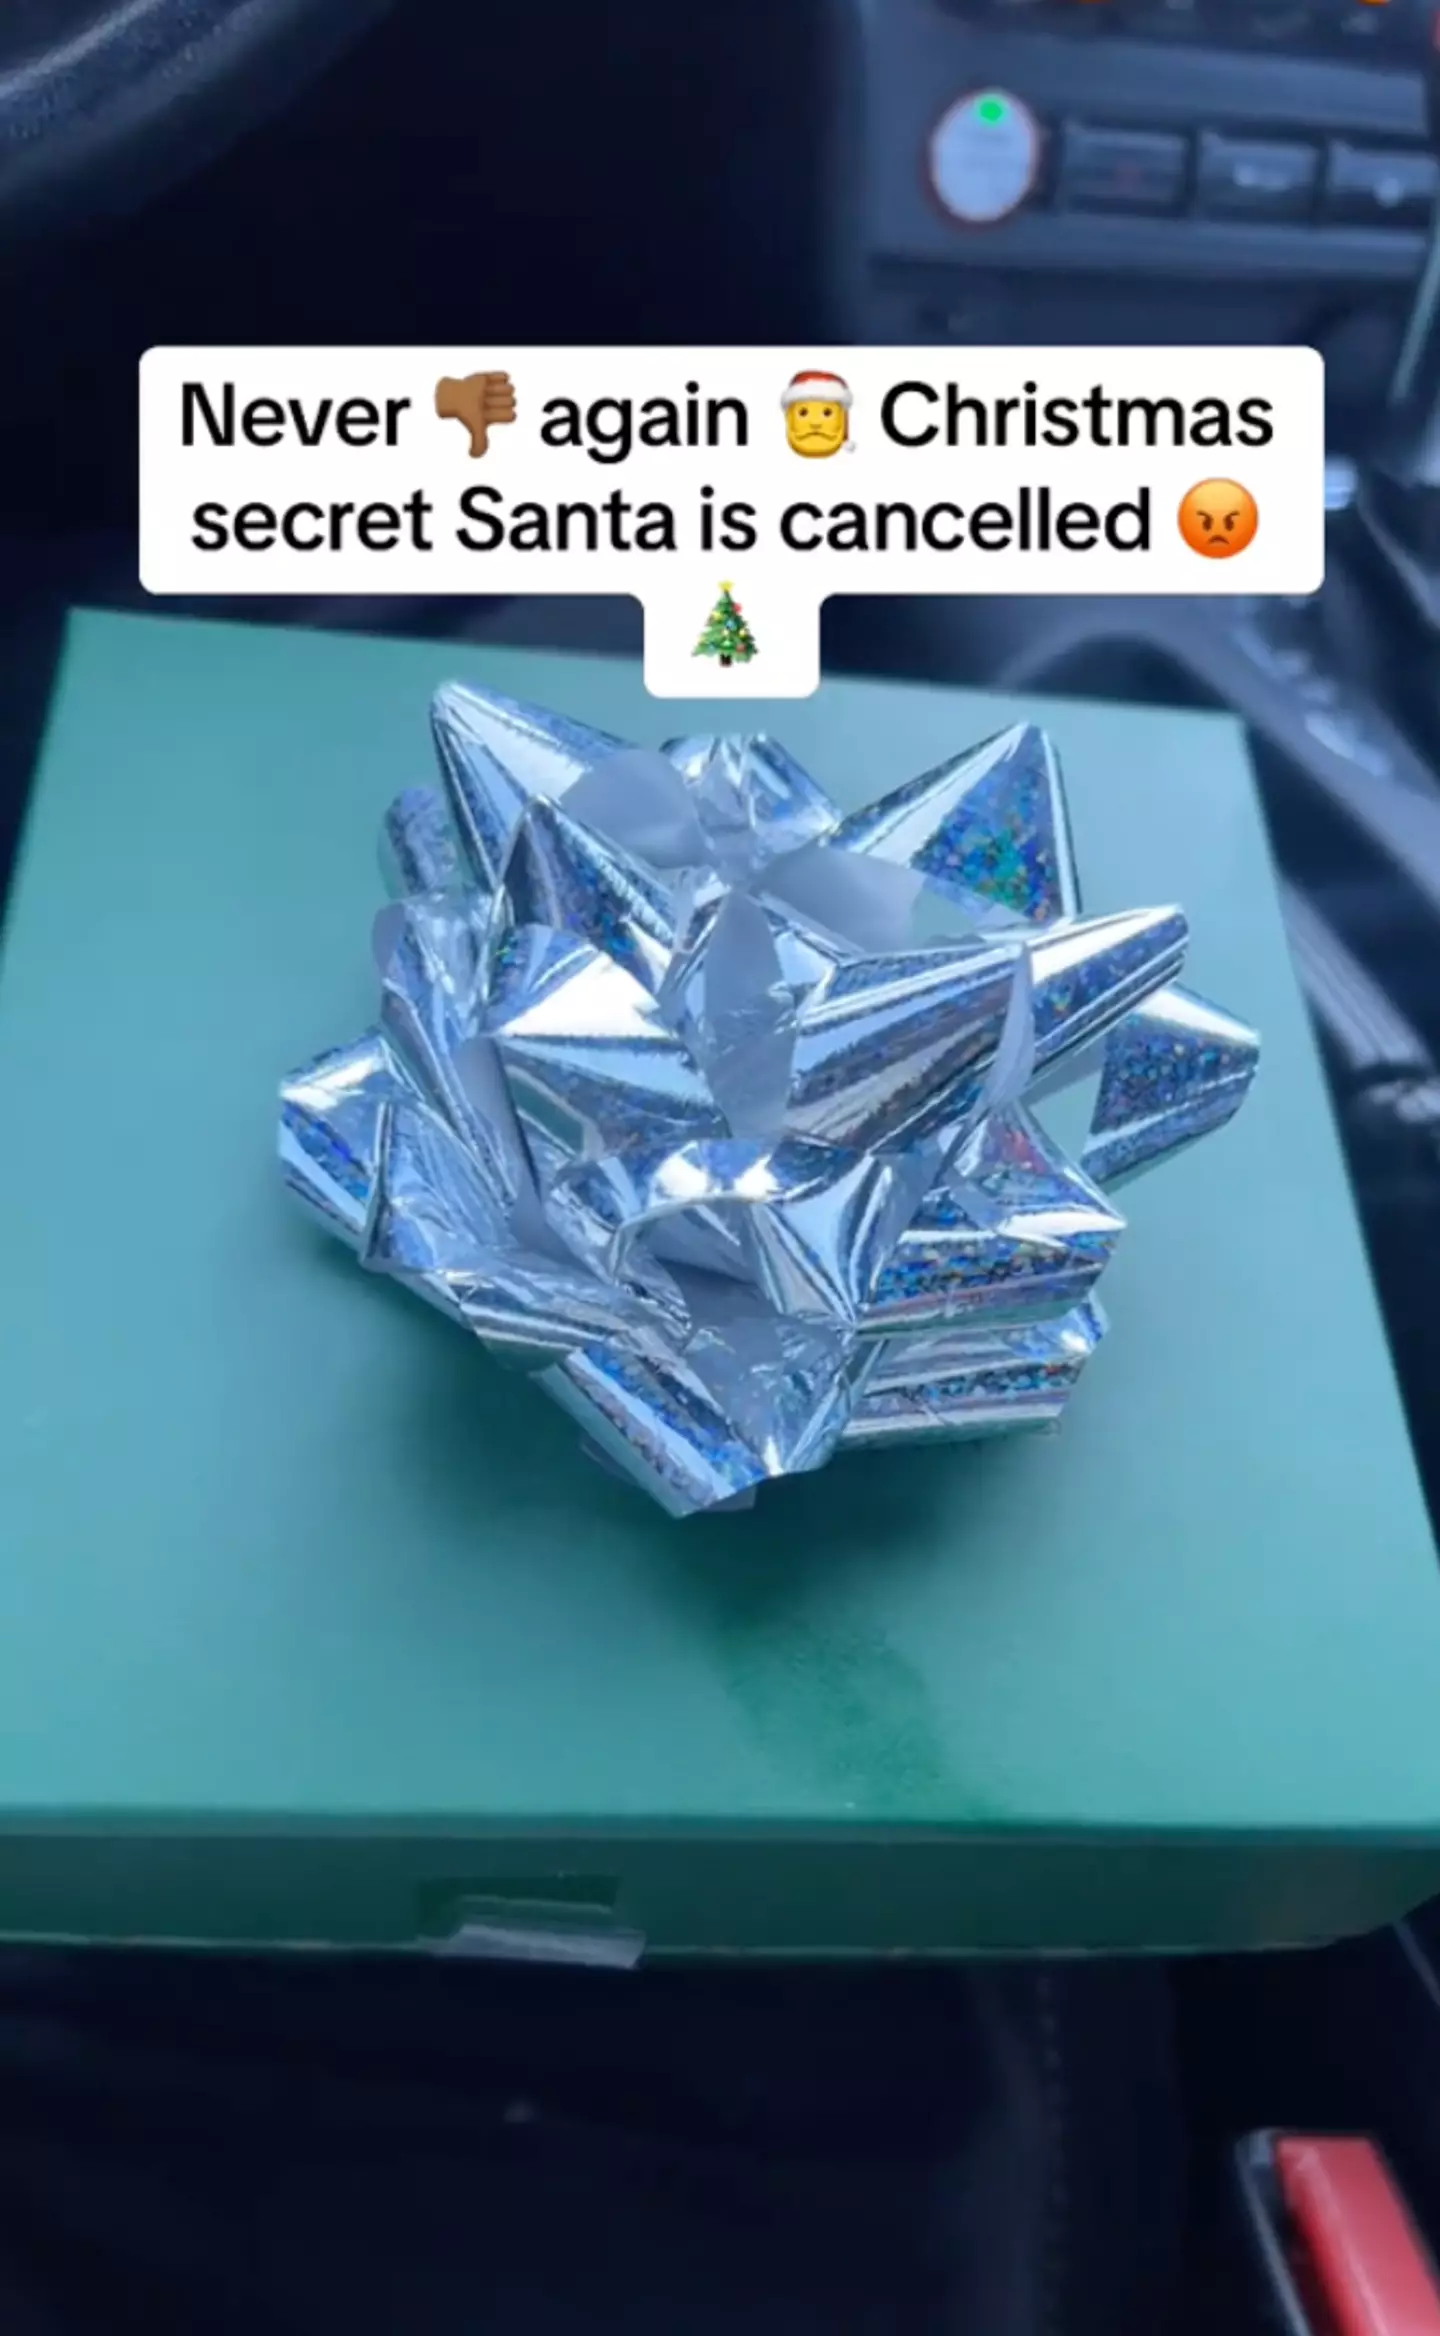 The TikTok star was disappointed by his gift.